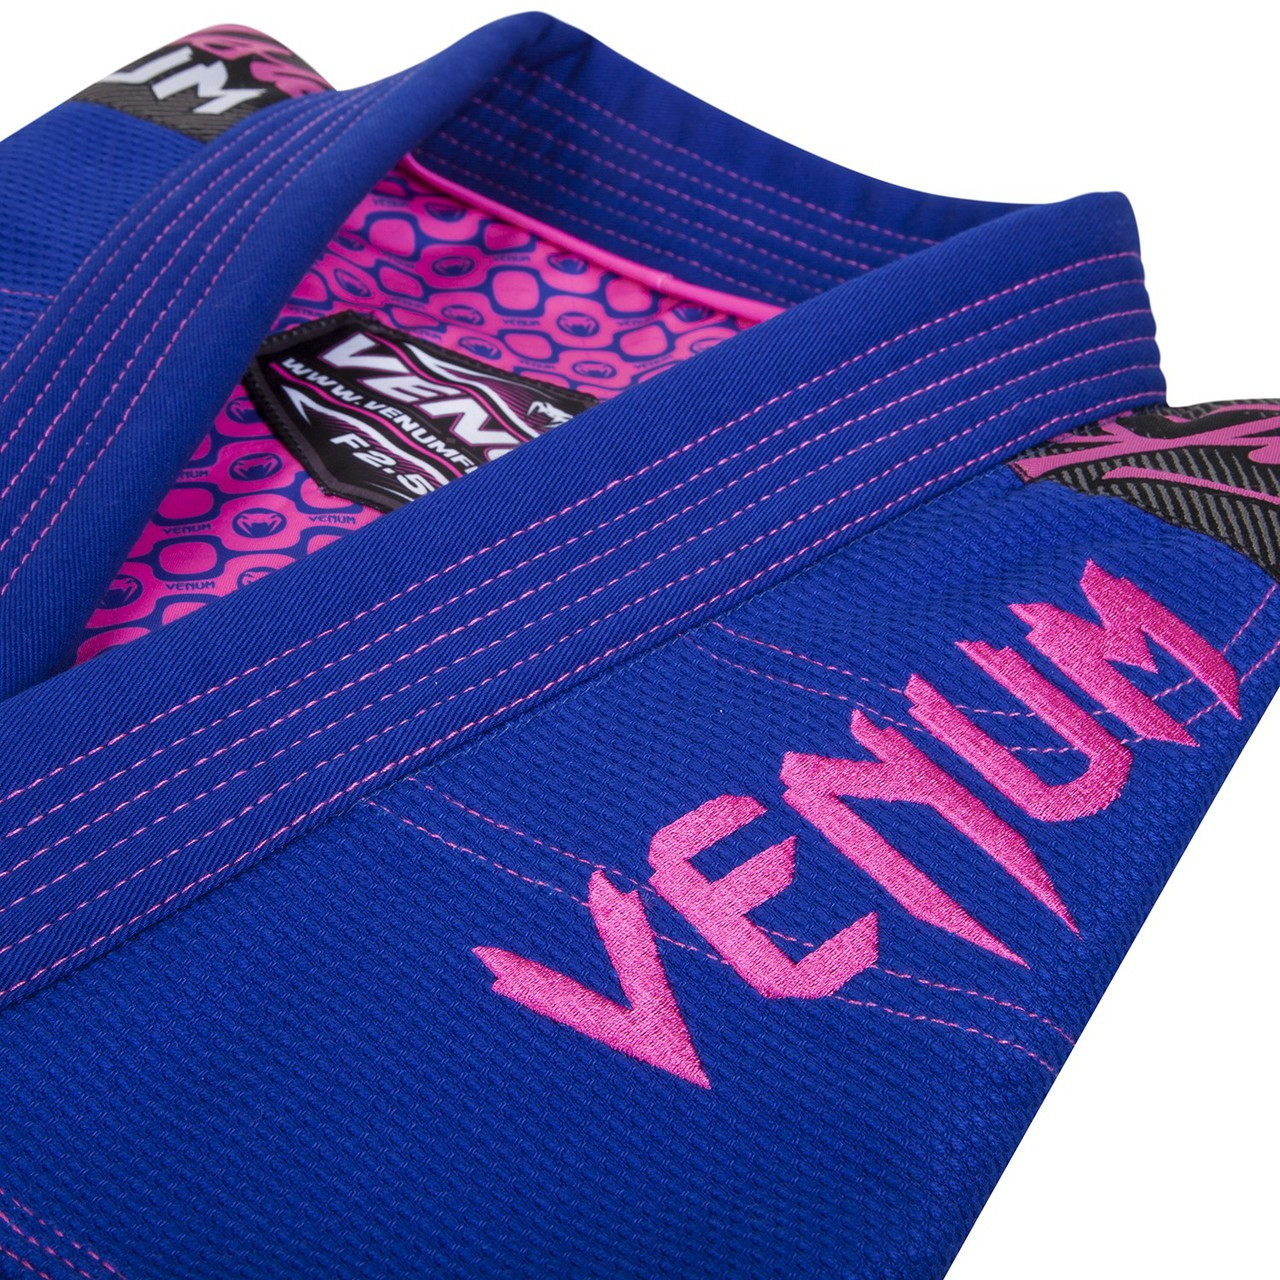 Venum Challenger 2.0 Female Gi Blue and pink.  The new Female challenger 2.0 gi is available in blue at www.thejiujitsushop.com 

Enjoy free shipping from The Jiu Jitsu Shop.  Top BJJ gear from the best brands at low prices and free shipping for men, women and kids.